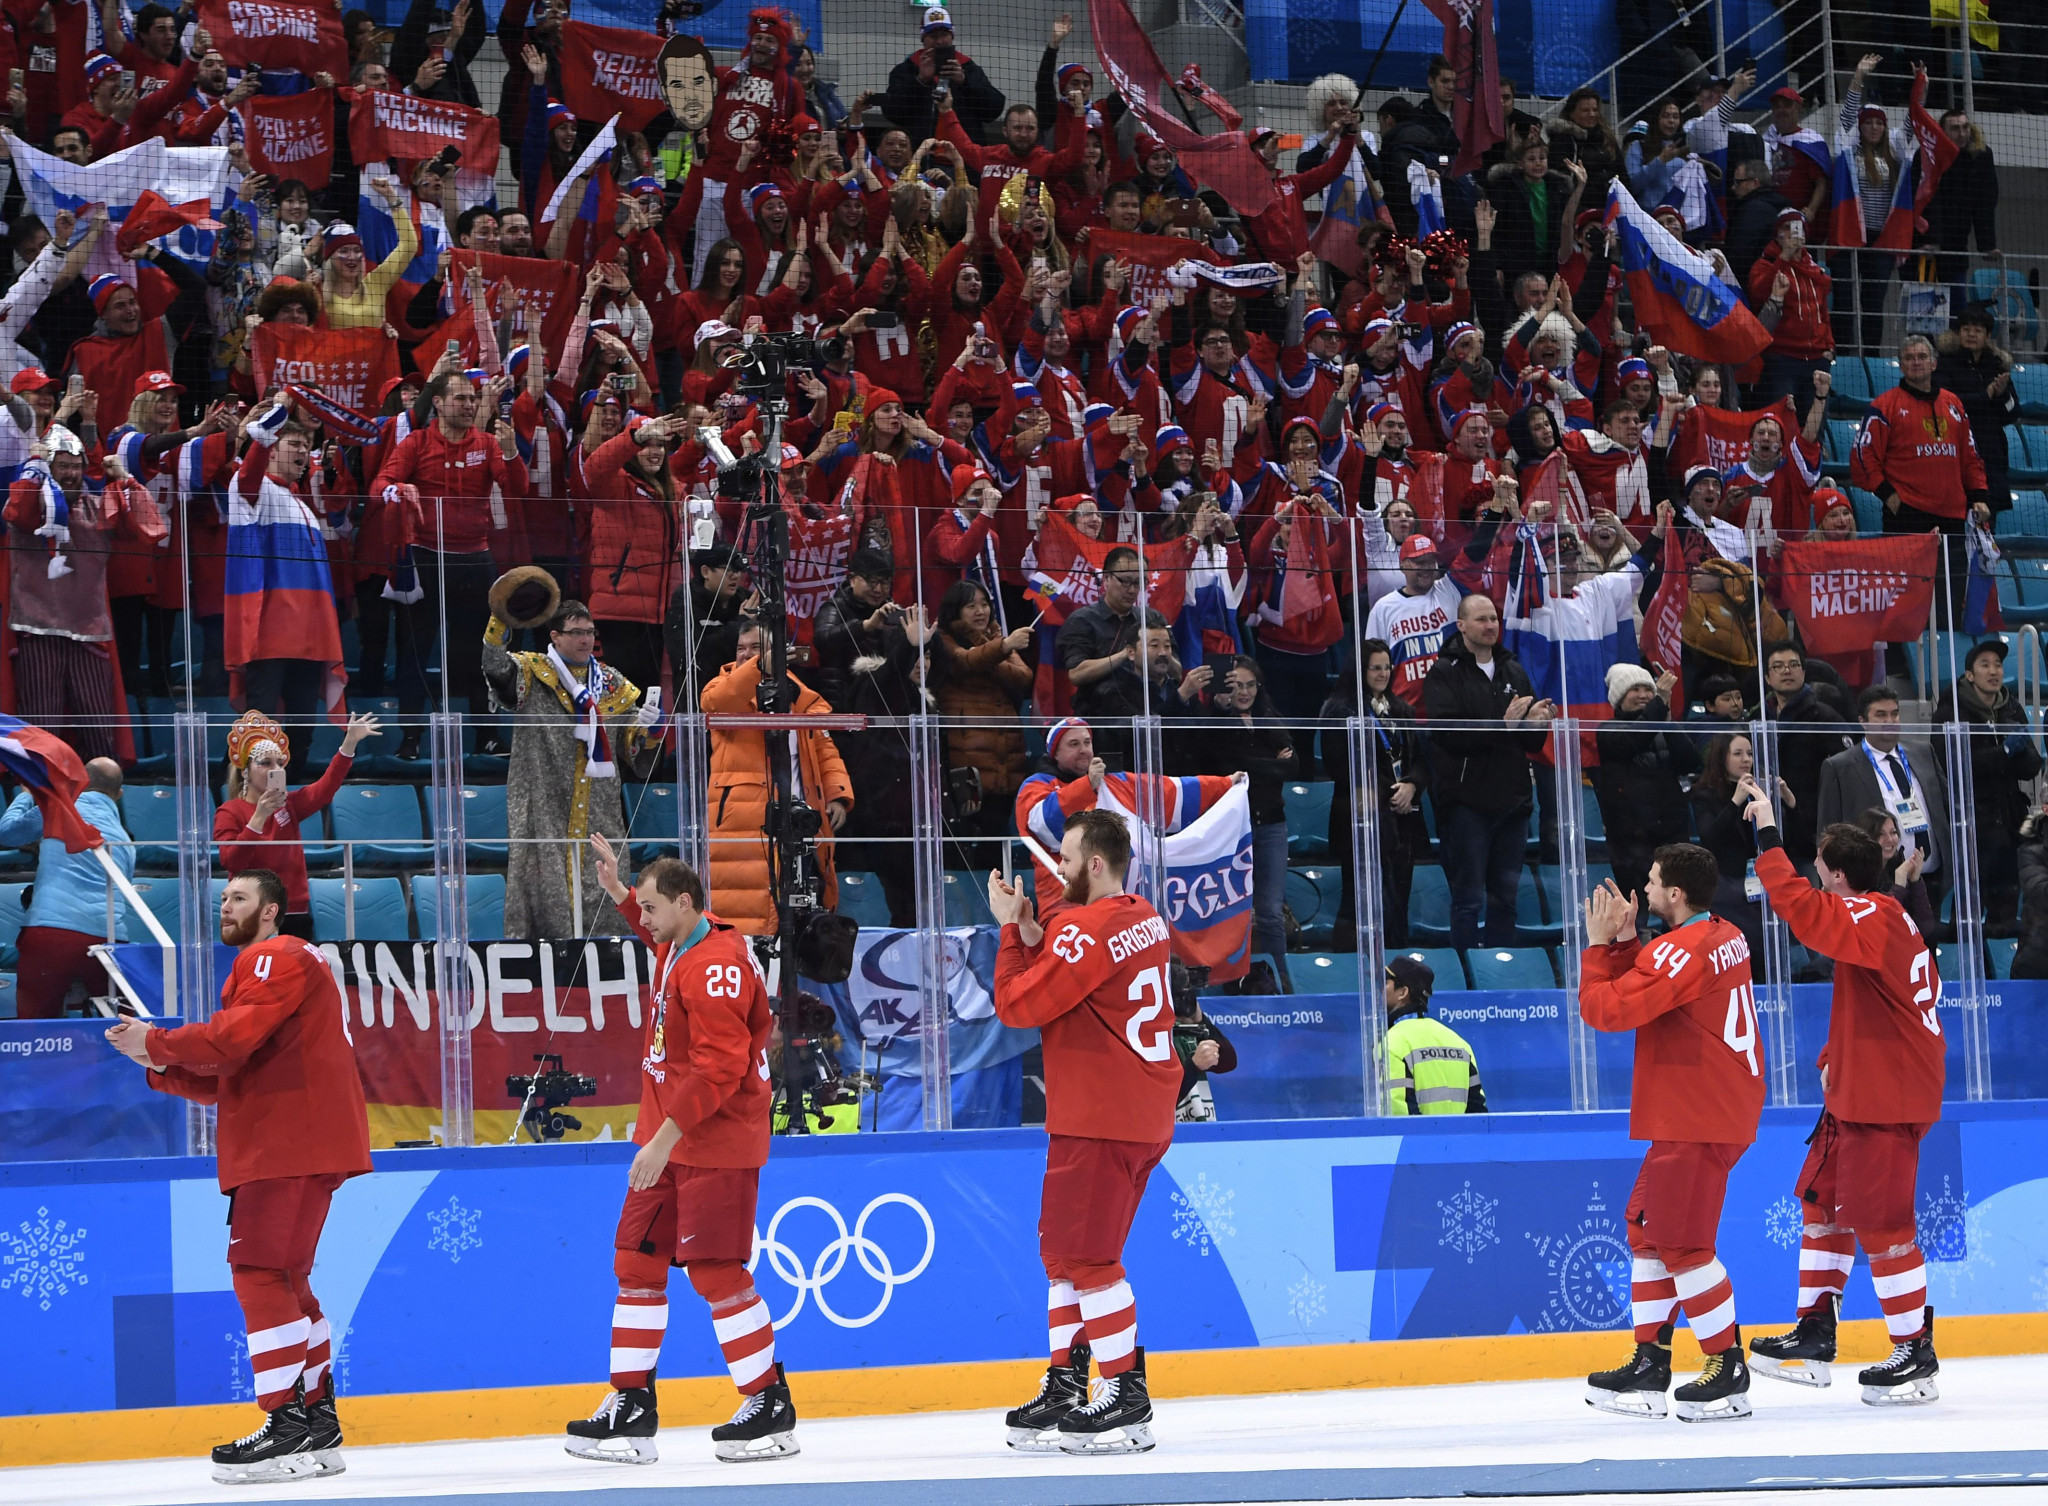 Fans were allowed to display Russian flags at last month's Olympic Games ©Getty Images